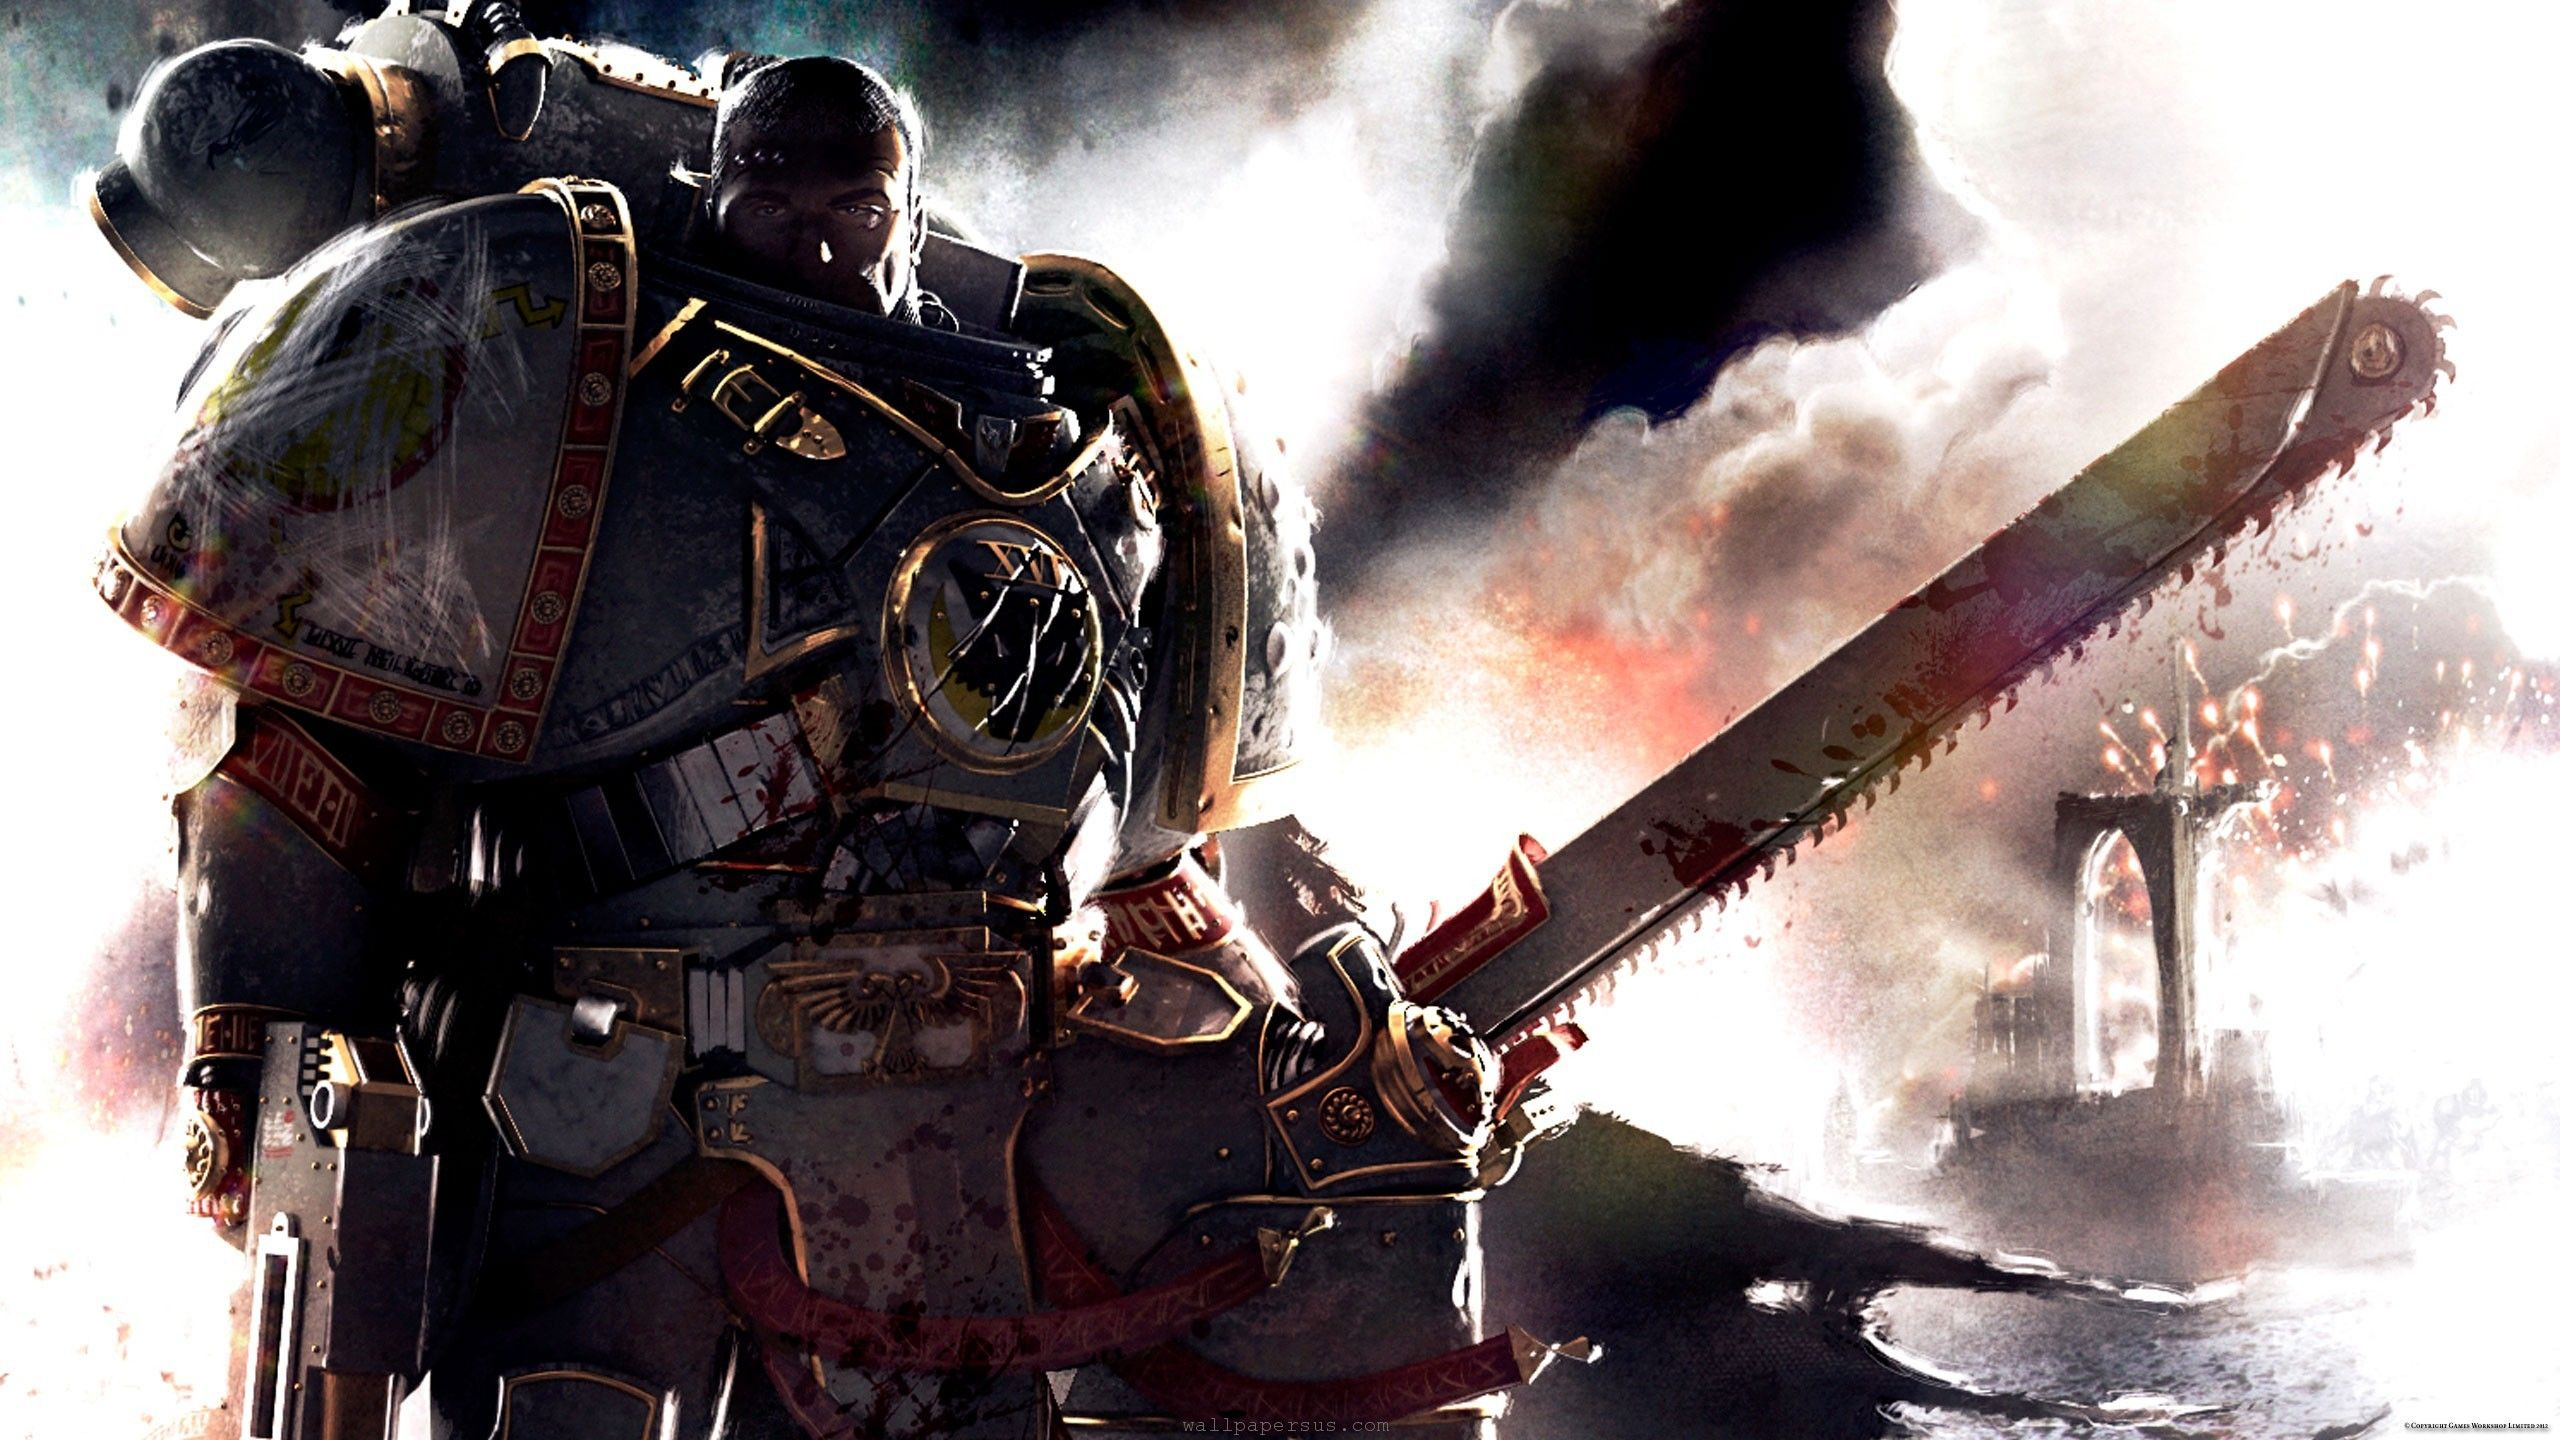 2560x1440 space marines warhammer Google Search | Space marine, Warhammer, Warhammer 40k